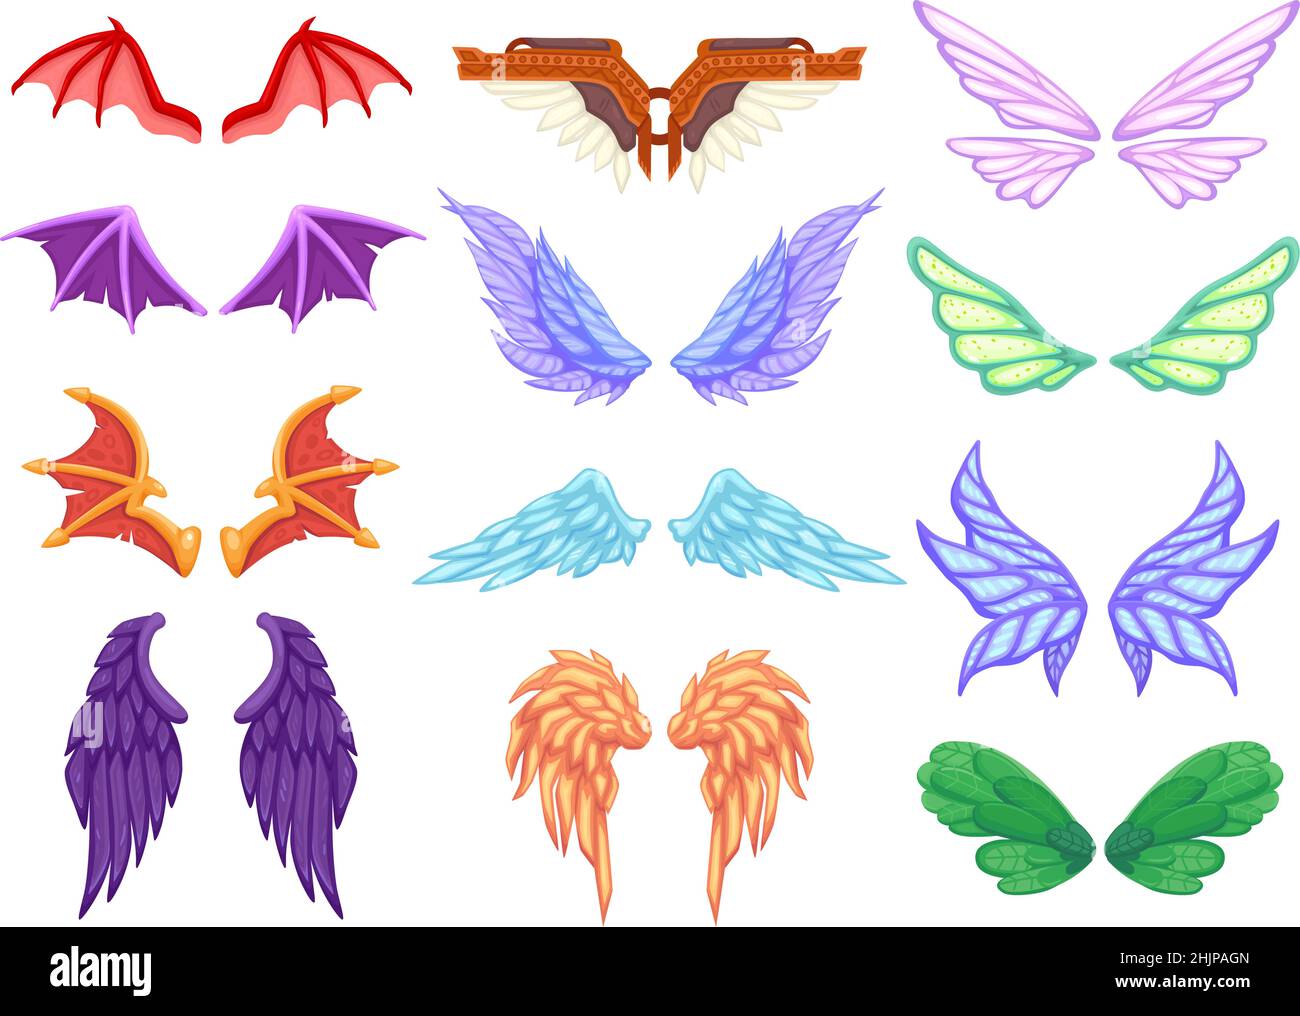 Cartoon dragon wings. Angel devil dragon bat fairy tail mythical monster pegasus unicorn fantasy animal wing collection, fly winged creature set icon vector illustration. Devil angel and dragon wings Stock Vector